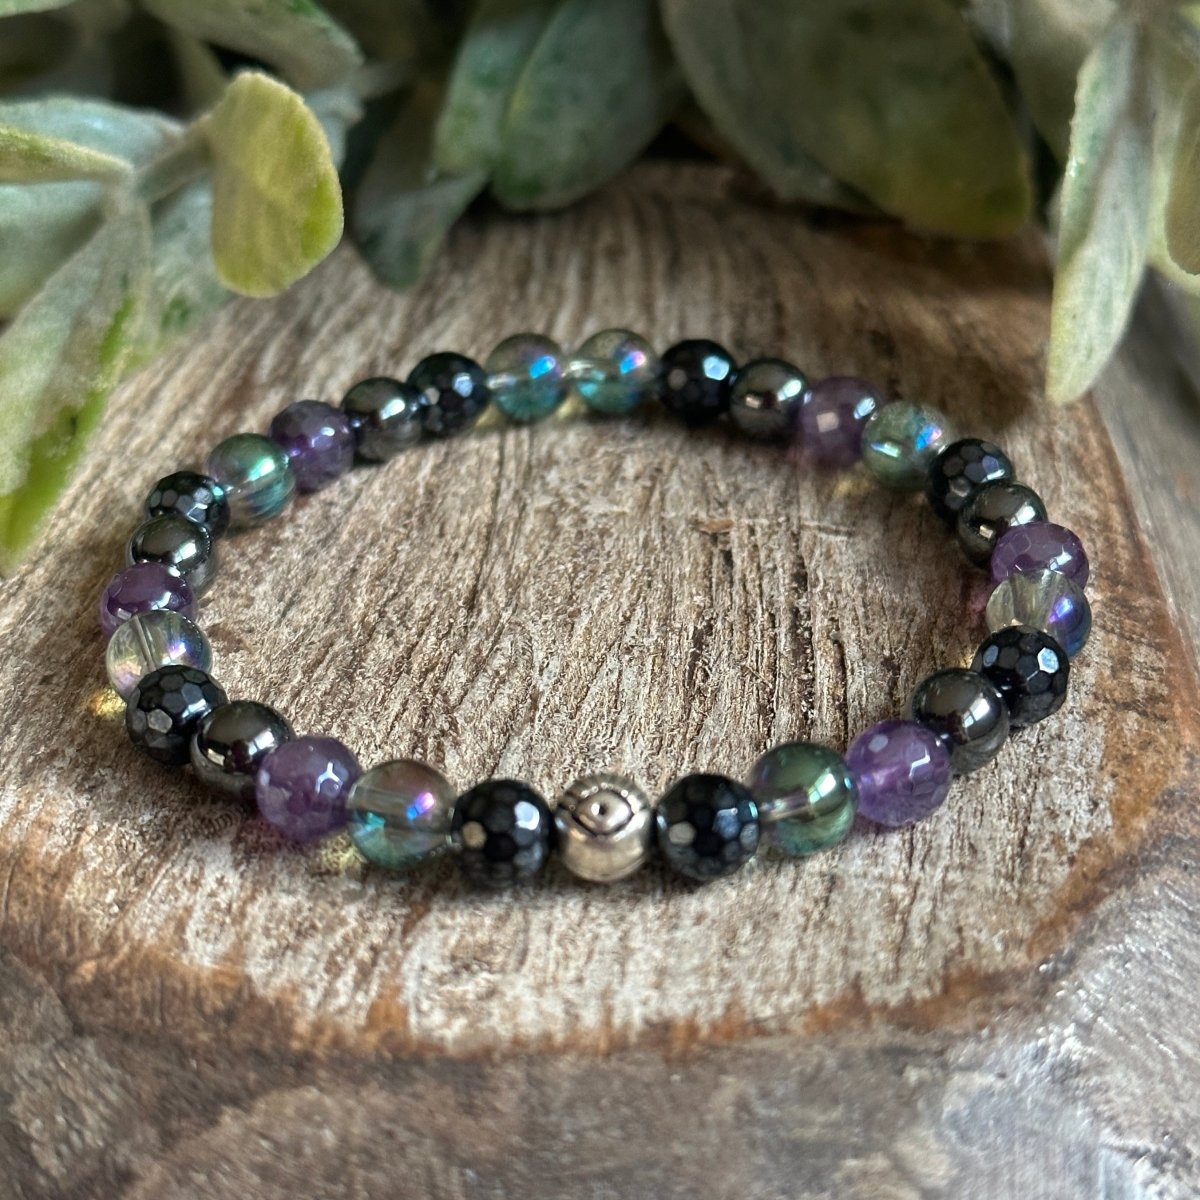 Mini Gemstone Stackable Bracelets for Men and Women (Guys and Girls)